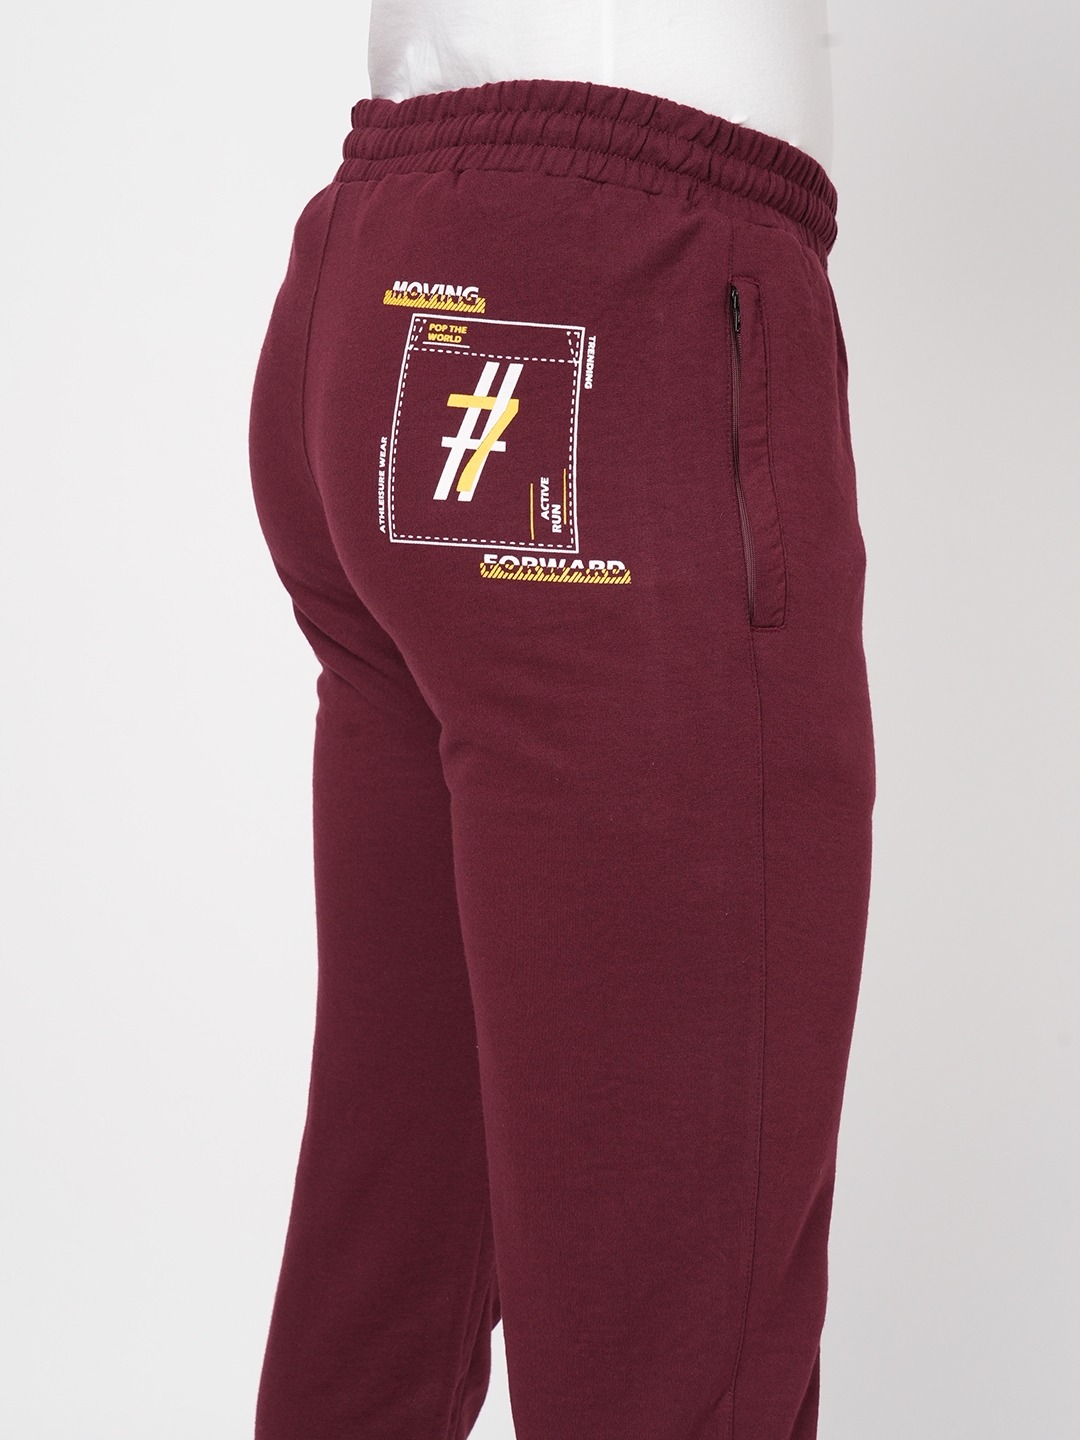 Men's Slim Fit Wine Red Cotton Blend Casual Joogers